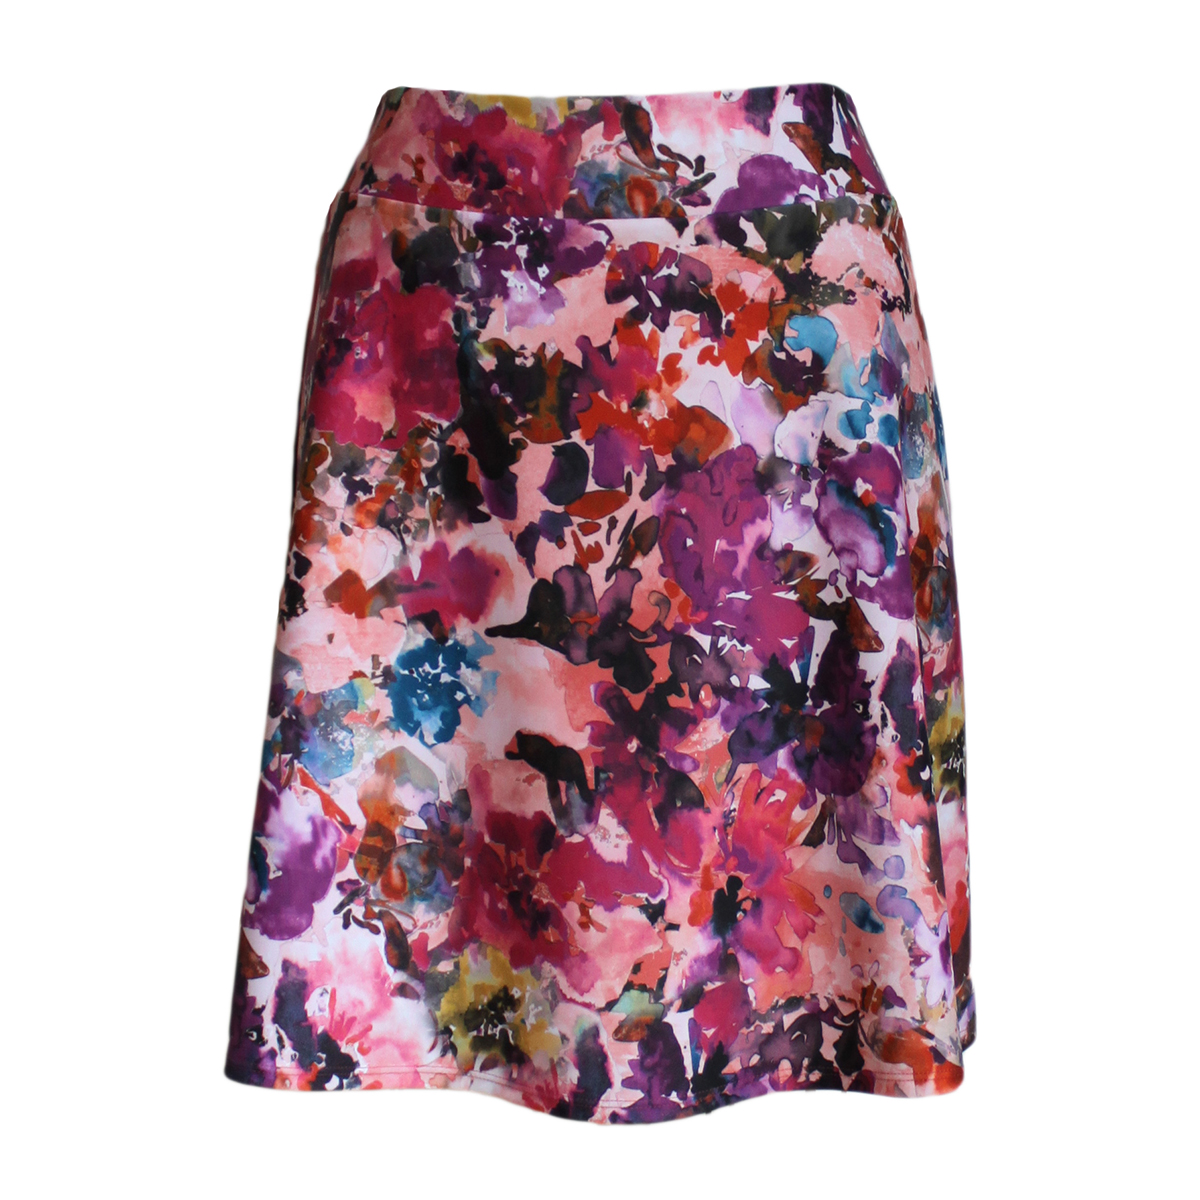 Abstract Watercolor, Floral Print, Jersey Knit, Travel Skirt, 